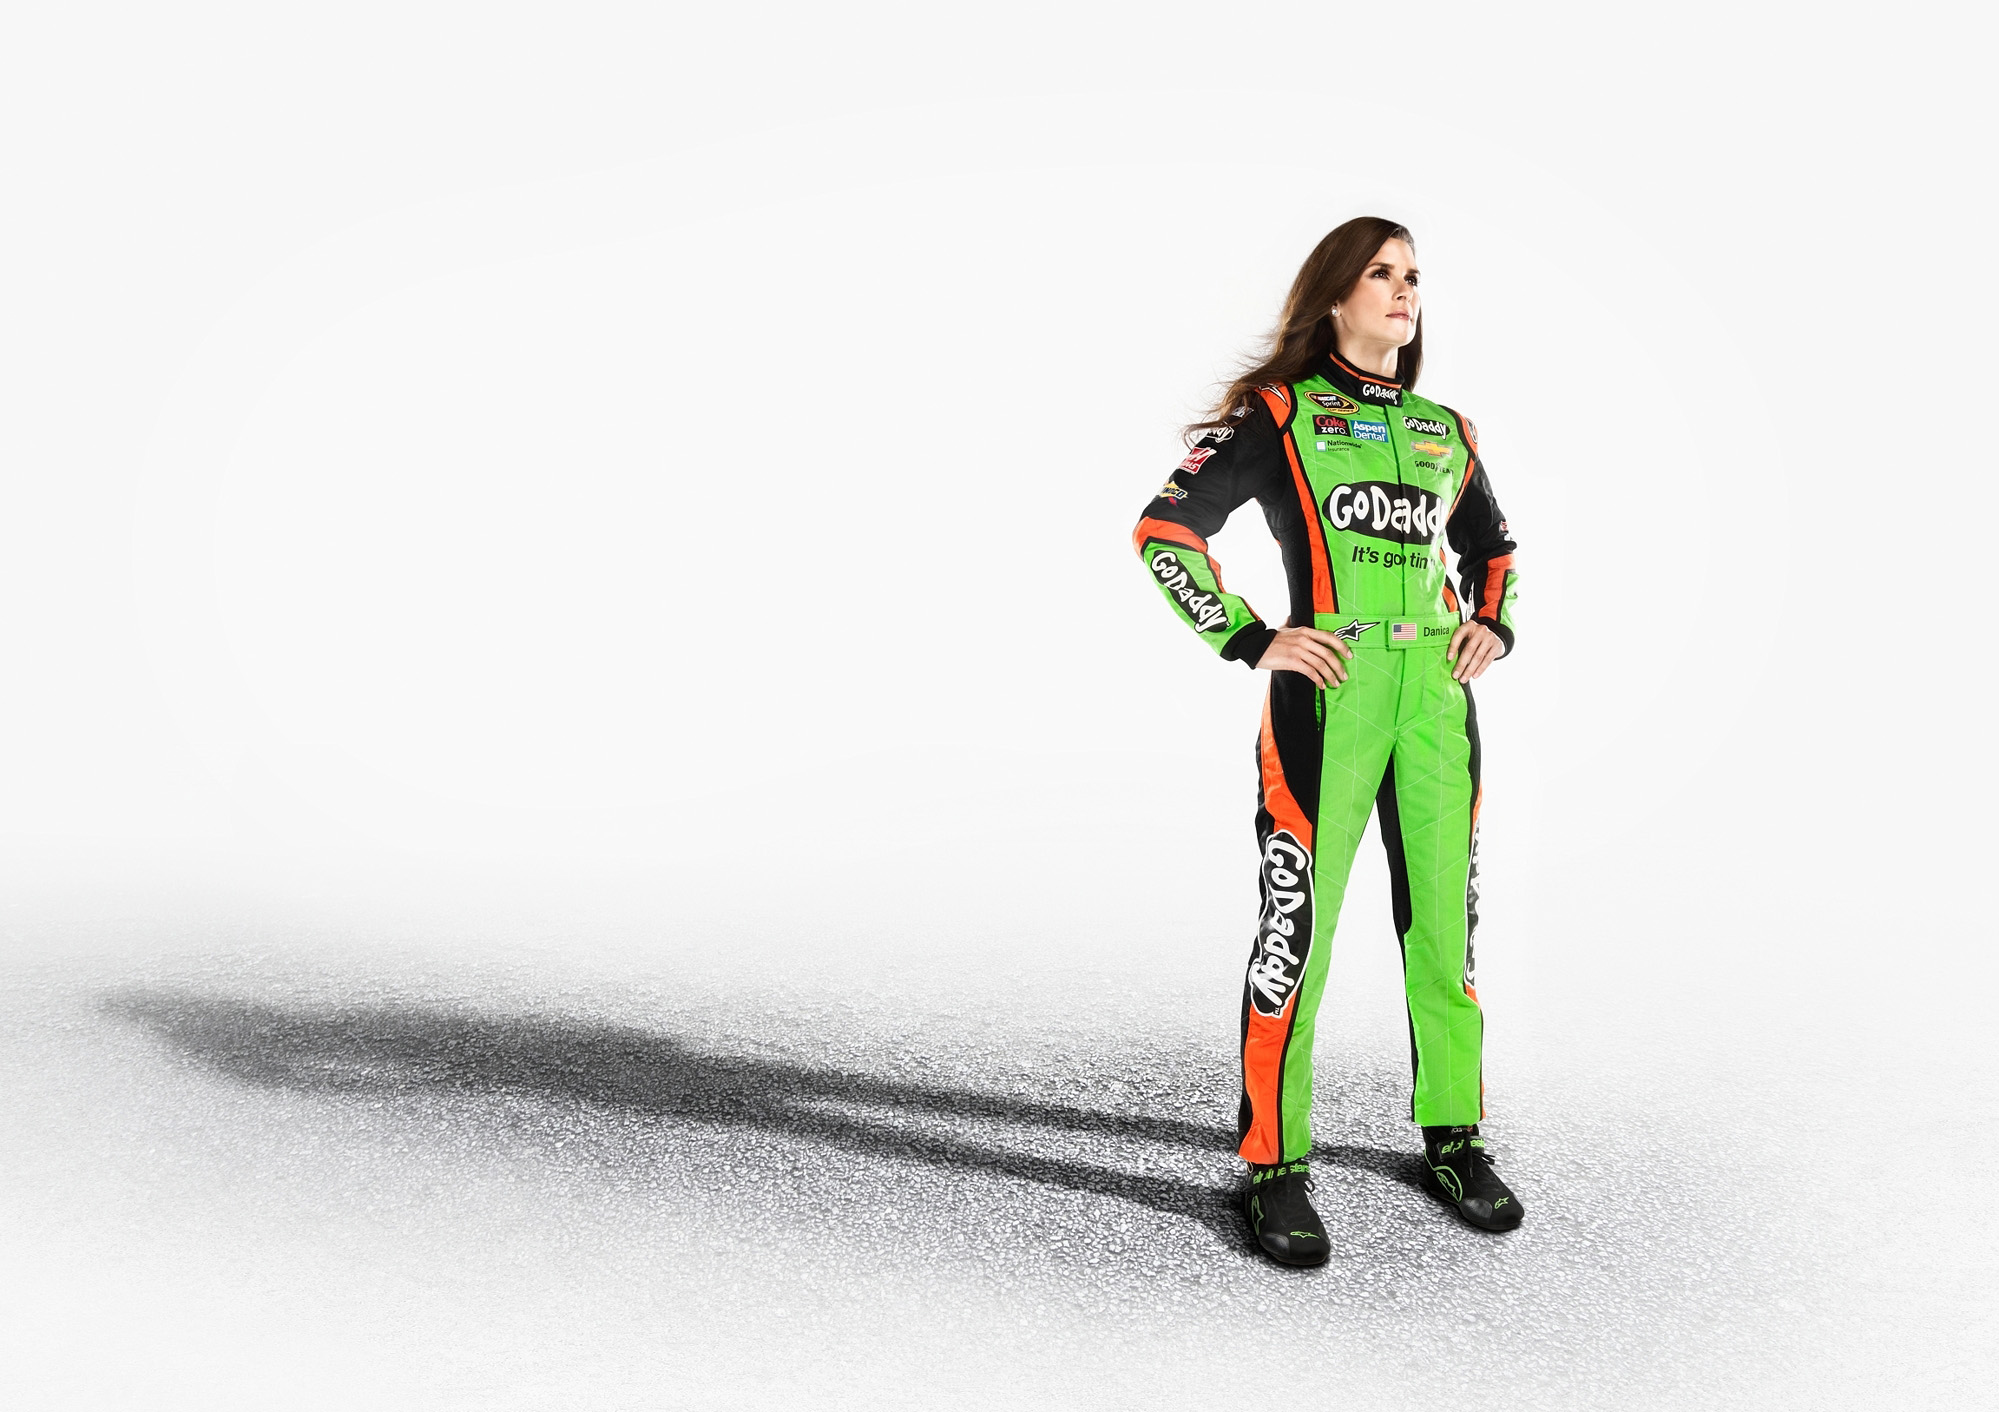 Danica Patrick photographed for the New York Times